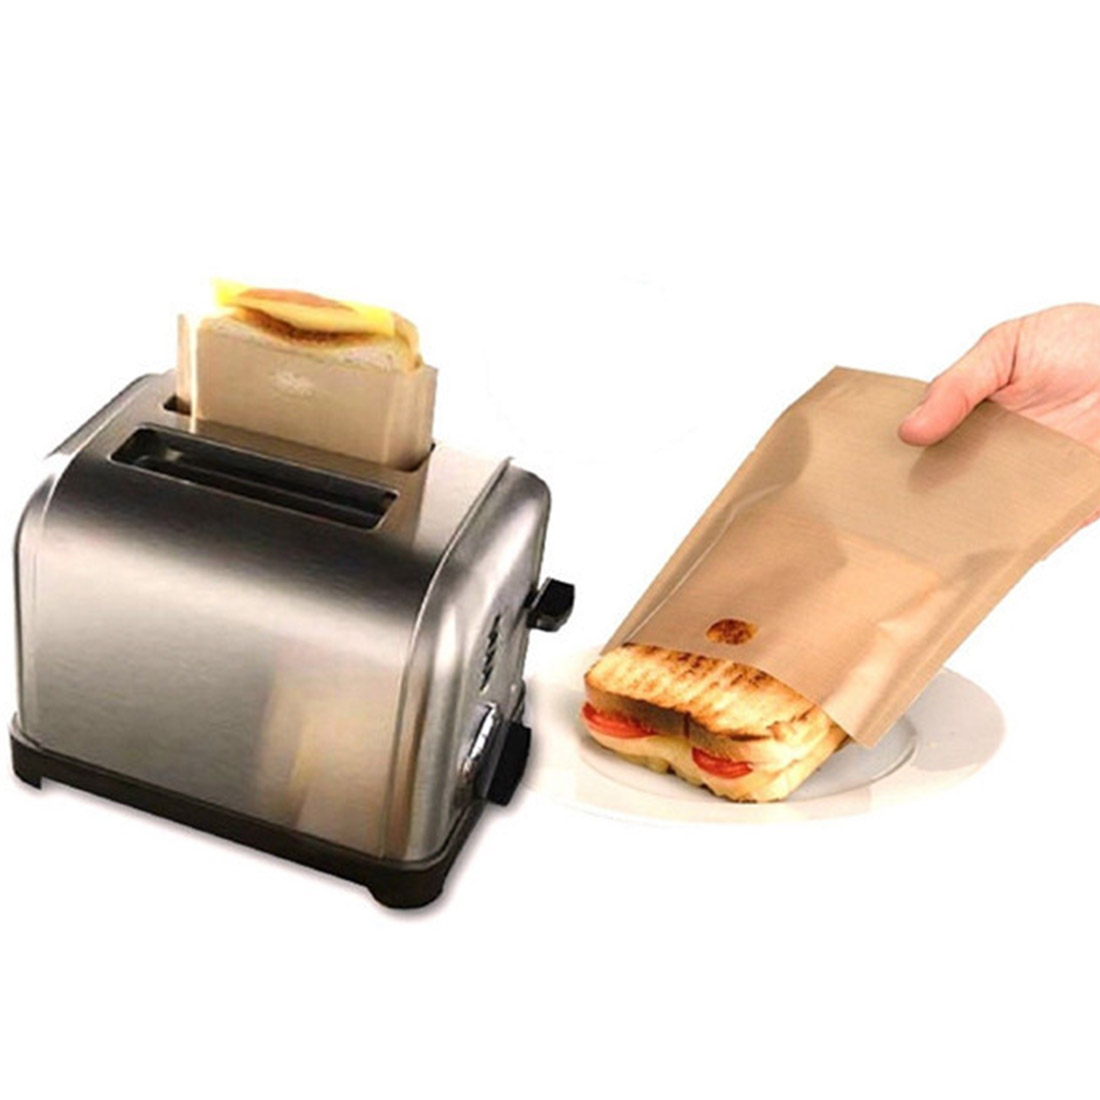 100% FREE - Reusable Toaster S...